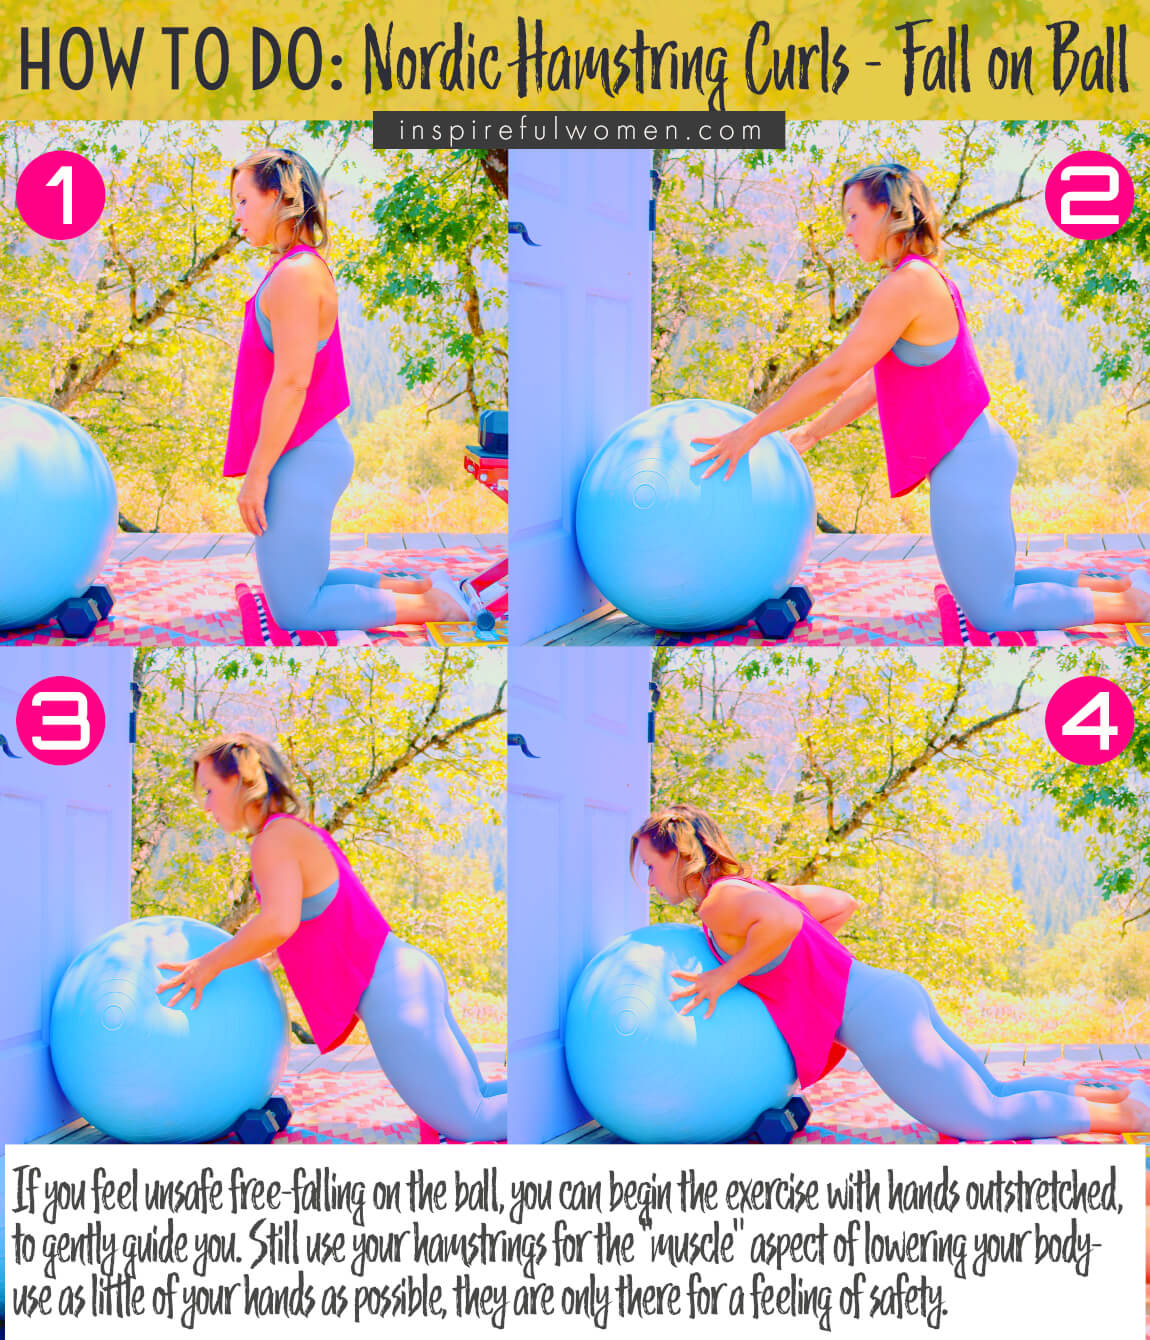 how-to-do-eccentric-nordic-hamstring-curls-fall-on-ball-at-home